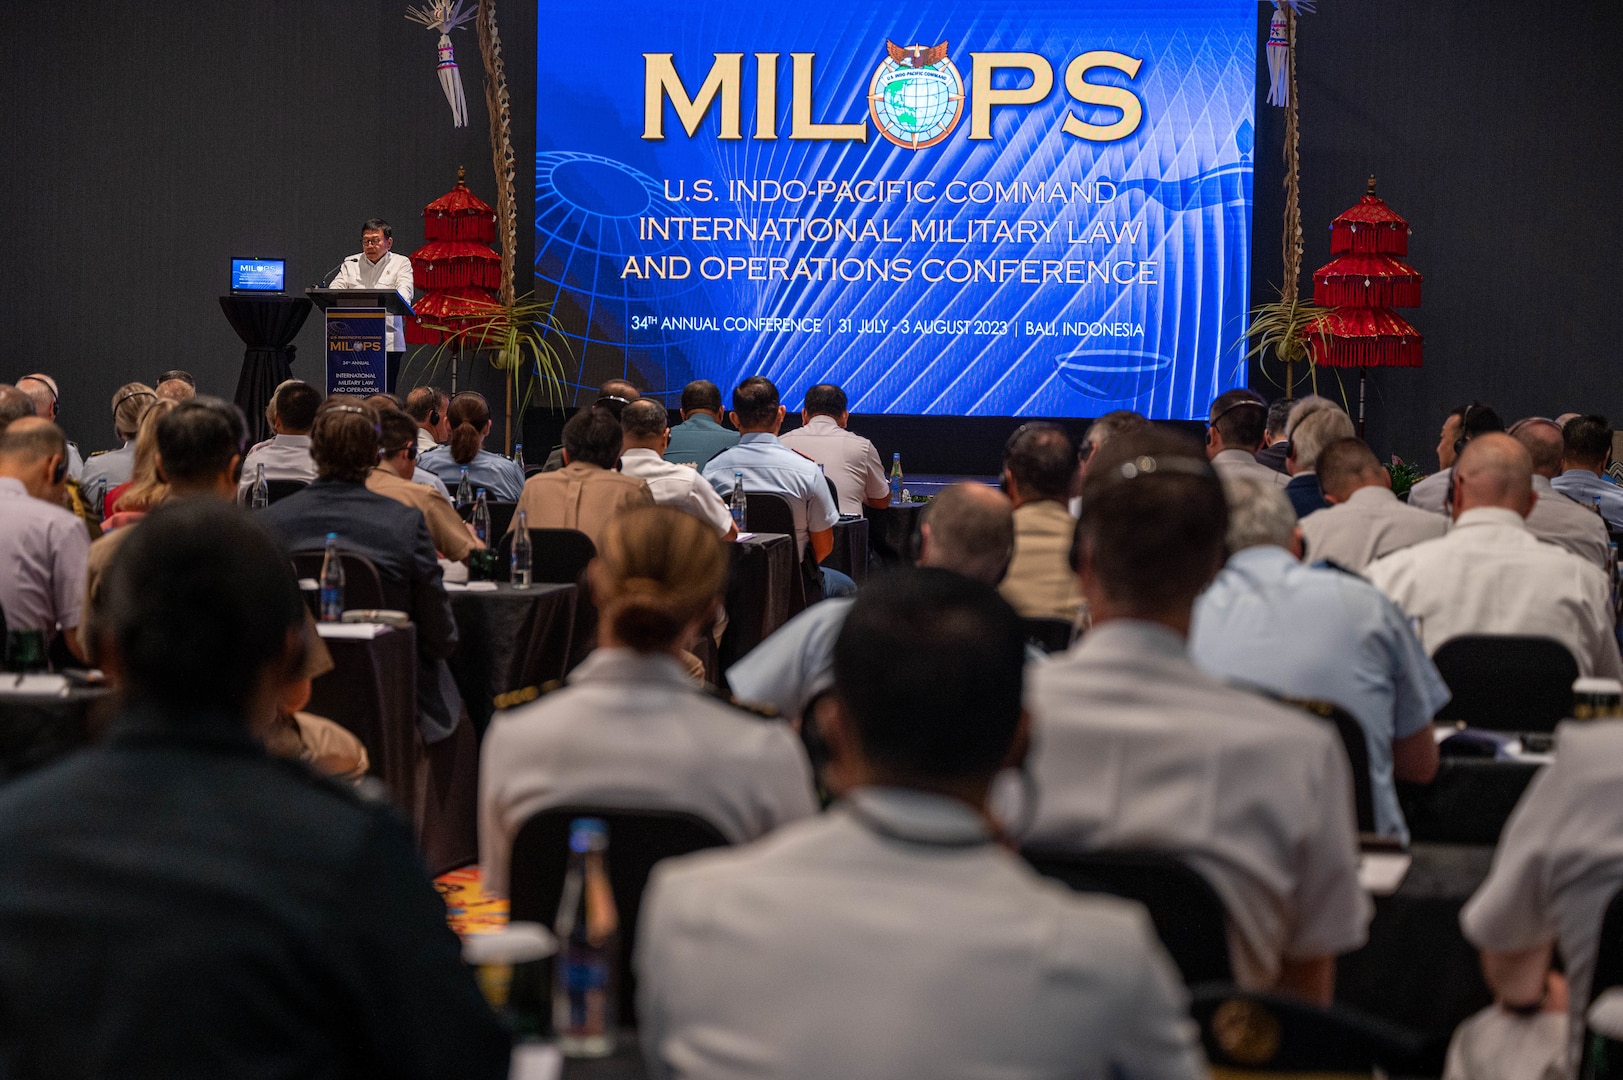 BALI, Indonesia (July 31, 2023) Retired Lt. Gen. Muhammad Herindra, Indonesian Deputy Defense Minister, speaks at the 34th annual Military Law and Operations Conference (MILOPS 23) in Bali, Indonesia. Hosted by USINDOPACOM and the Indonesian Ministry of Defense, MILOPS 23 included participants from 34 nations and international organizations who engaged in discussions and dialogue to expand cooperation and uphold international law, rules and norms in the region. USINDOPACOM is committed to enhancing stability in the Indo-Pacific region by promoting security cooperation, encouraging peaceful development, responding to contingencies, deterring aggression and, when necessary, fighting to win. (U.S. Navy photo by Chief Mass Communication Specialist Shannon M. Smith)